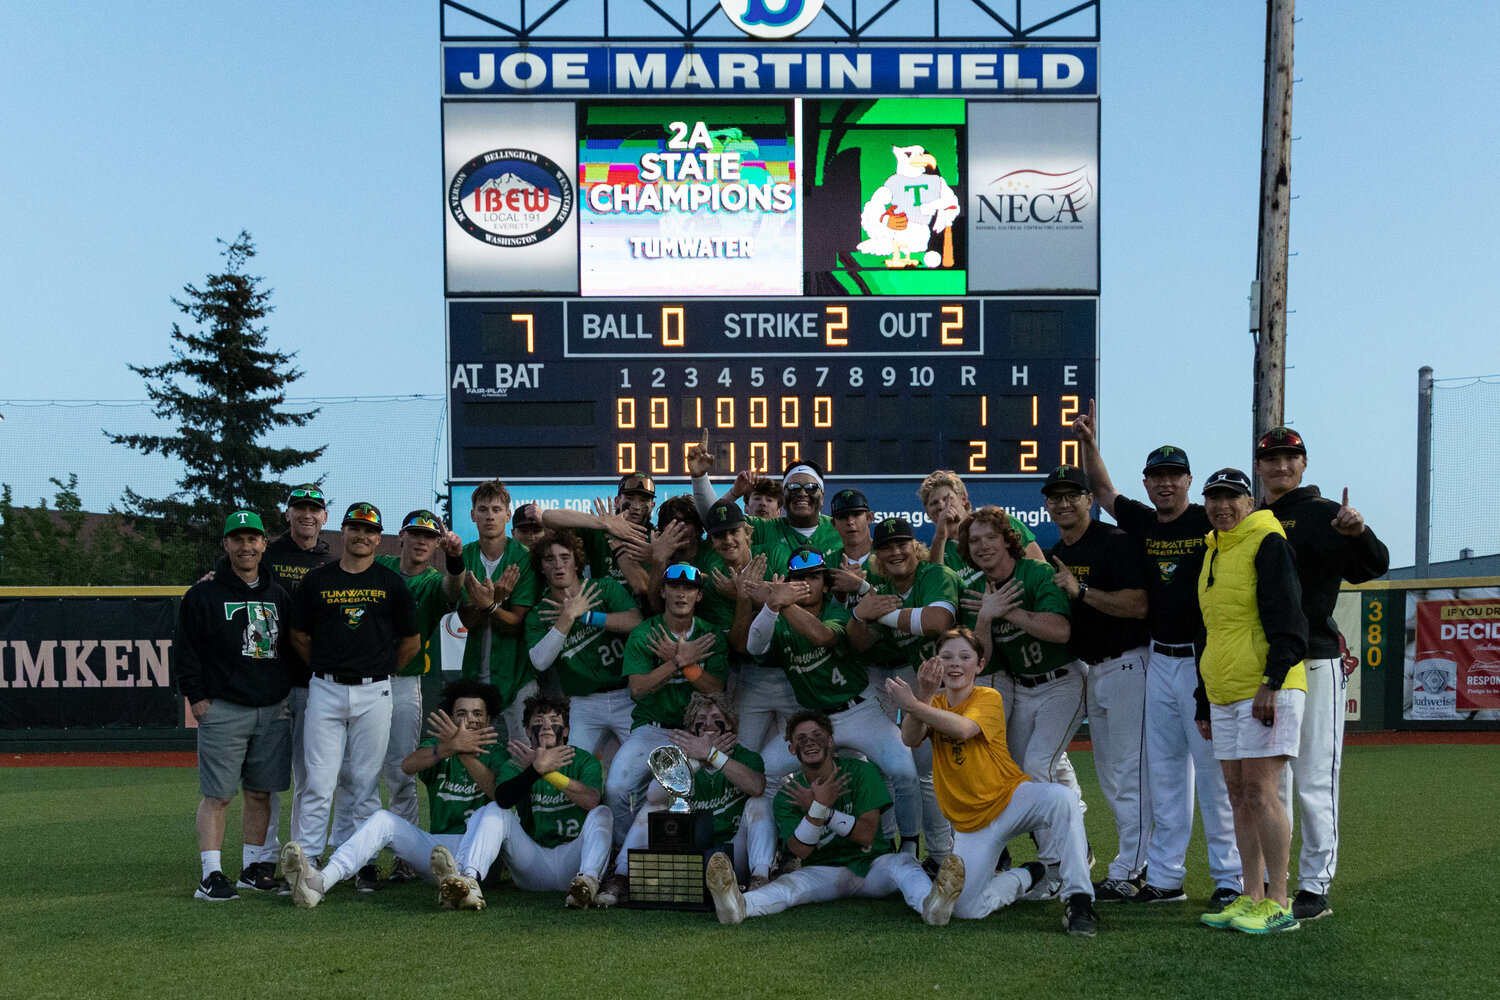 The Tumwater baseball team poses with the first-place trophy after a 2-1 win in the 2A state title against Lynden at Joe Martin Stadium in Bellingham May 27.